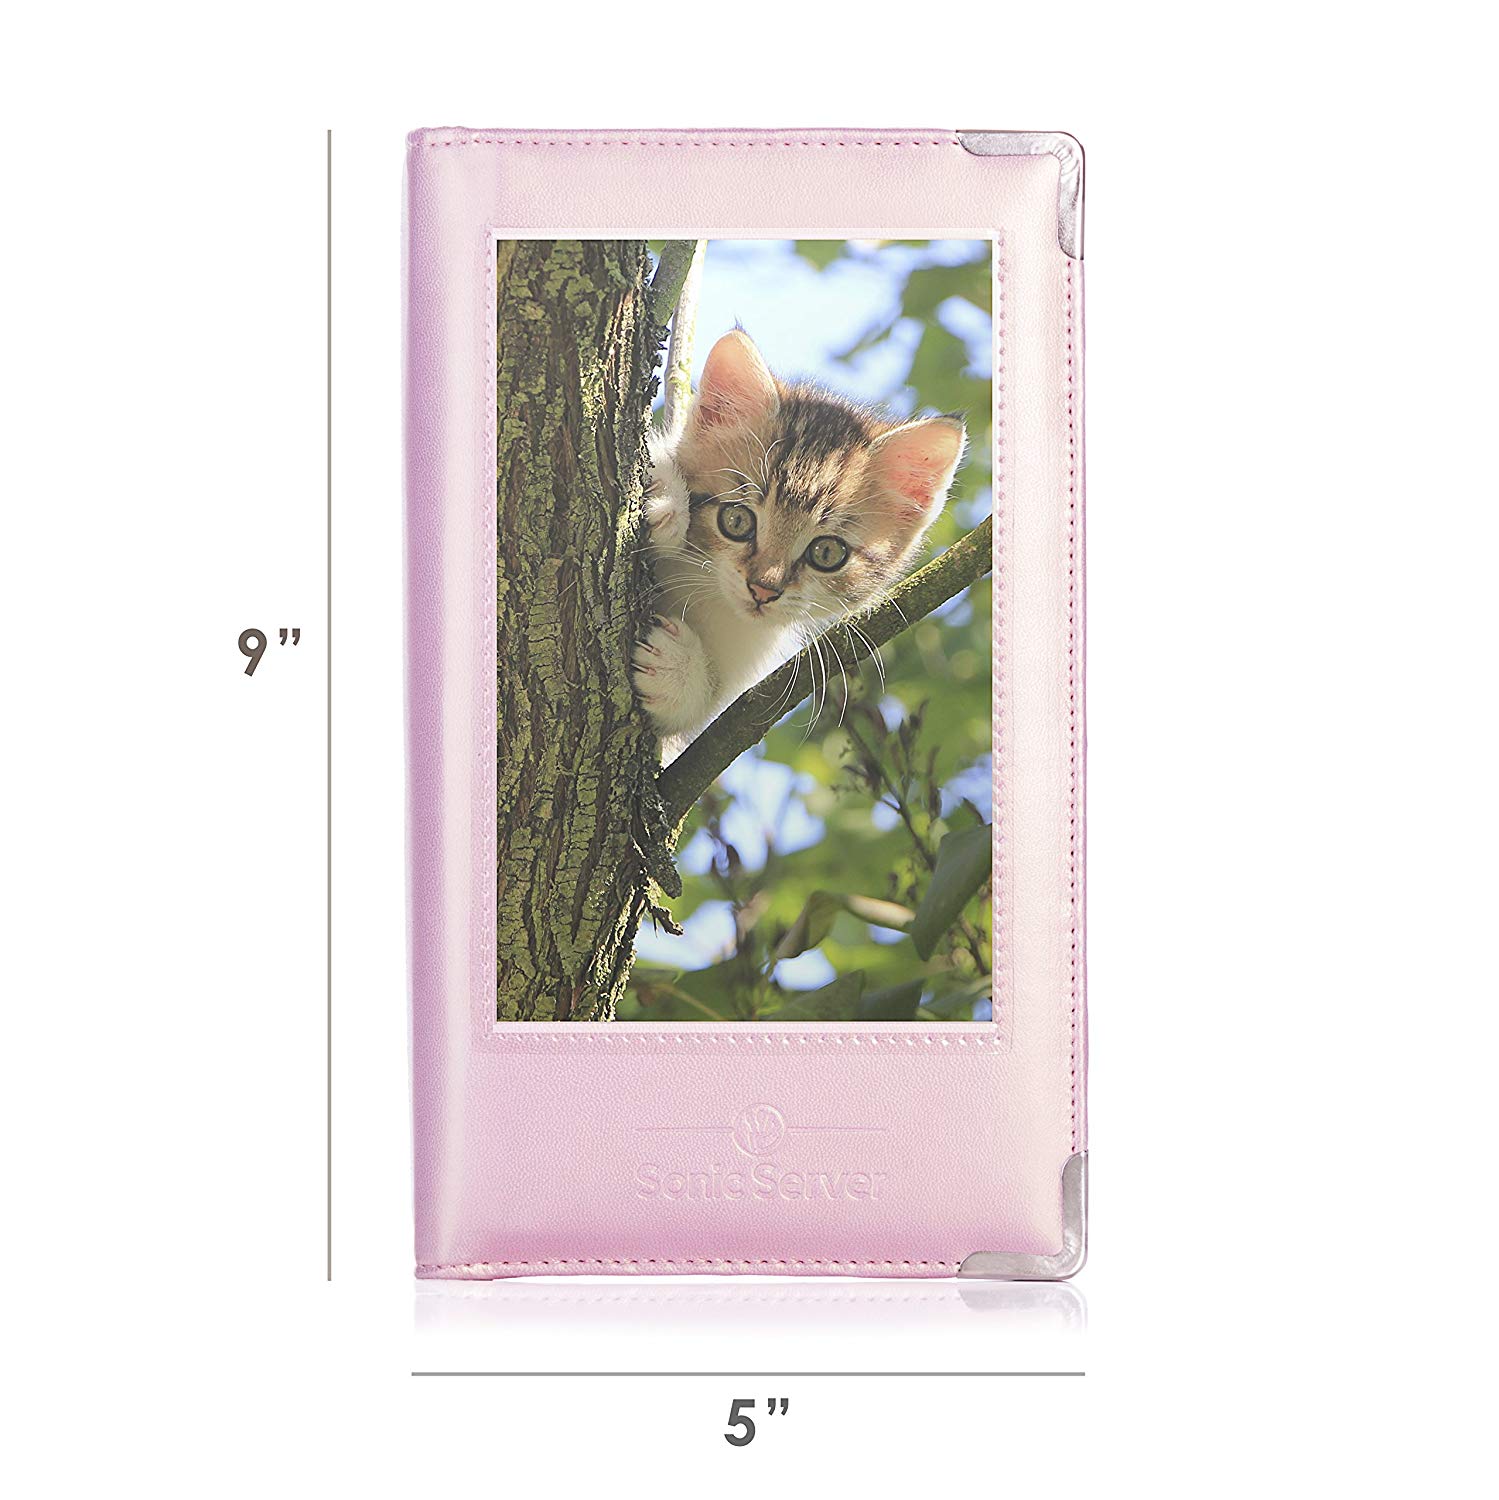 Sonic Server Book 5 x 9 Large Deluxe Millennial Pink Organizer for Waitress/Waiter - 12 Pockets includes Window for Personalization